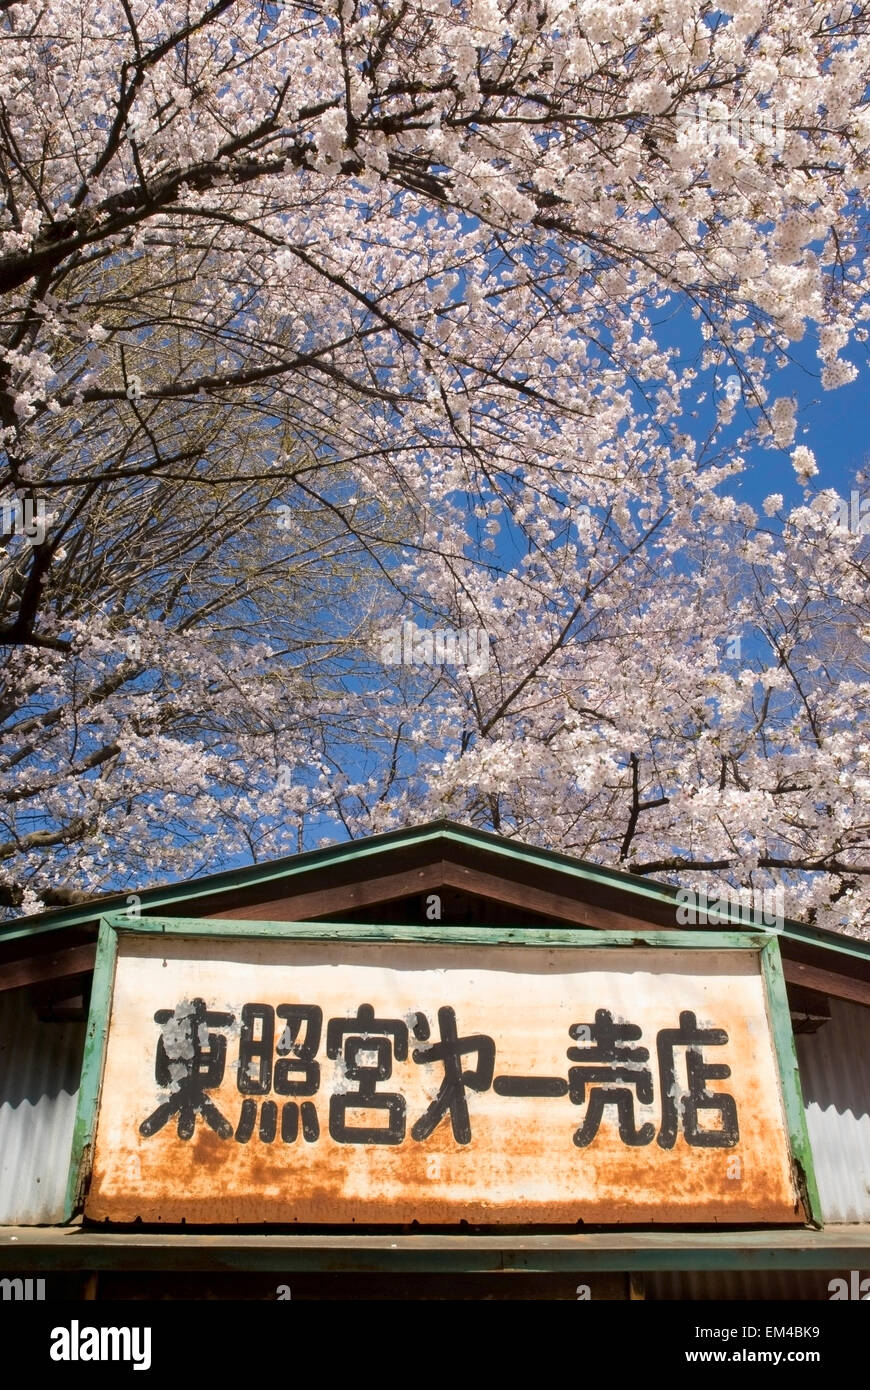 Old Japanese Metal Sign With Cherry Blossom Tree Behind; Tokyo Japan Stock Photo